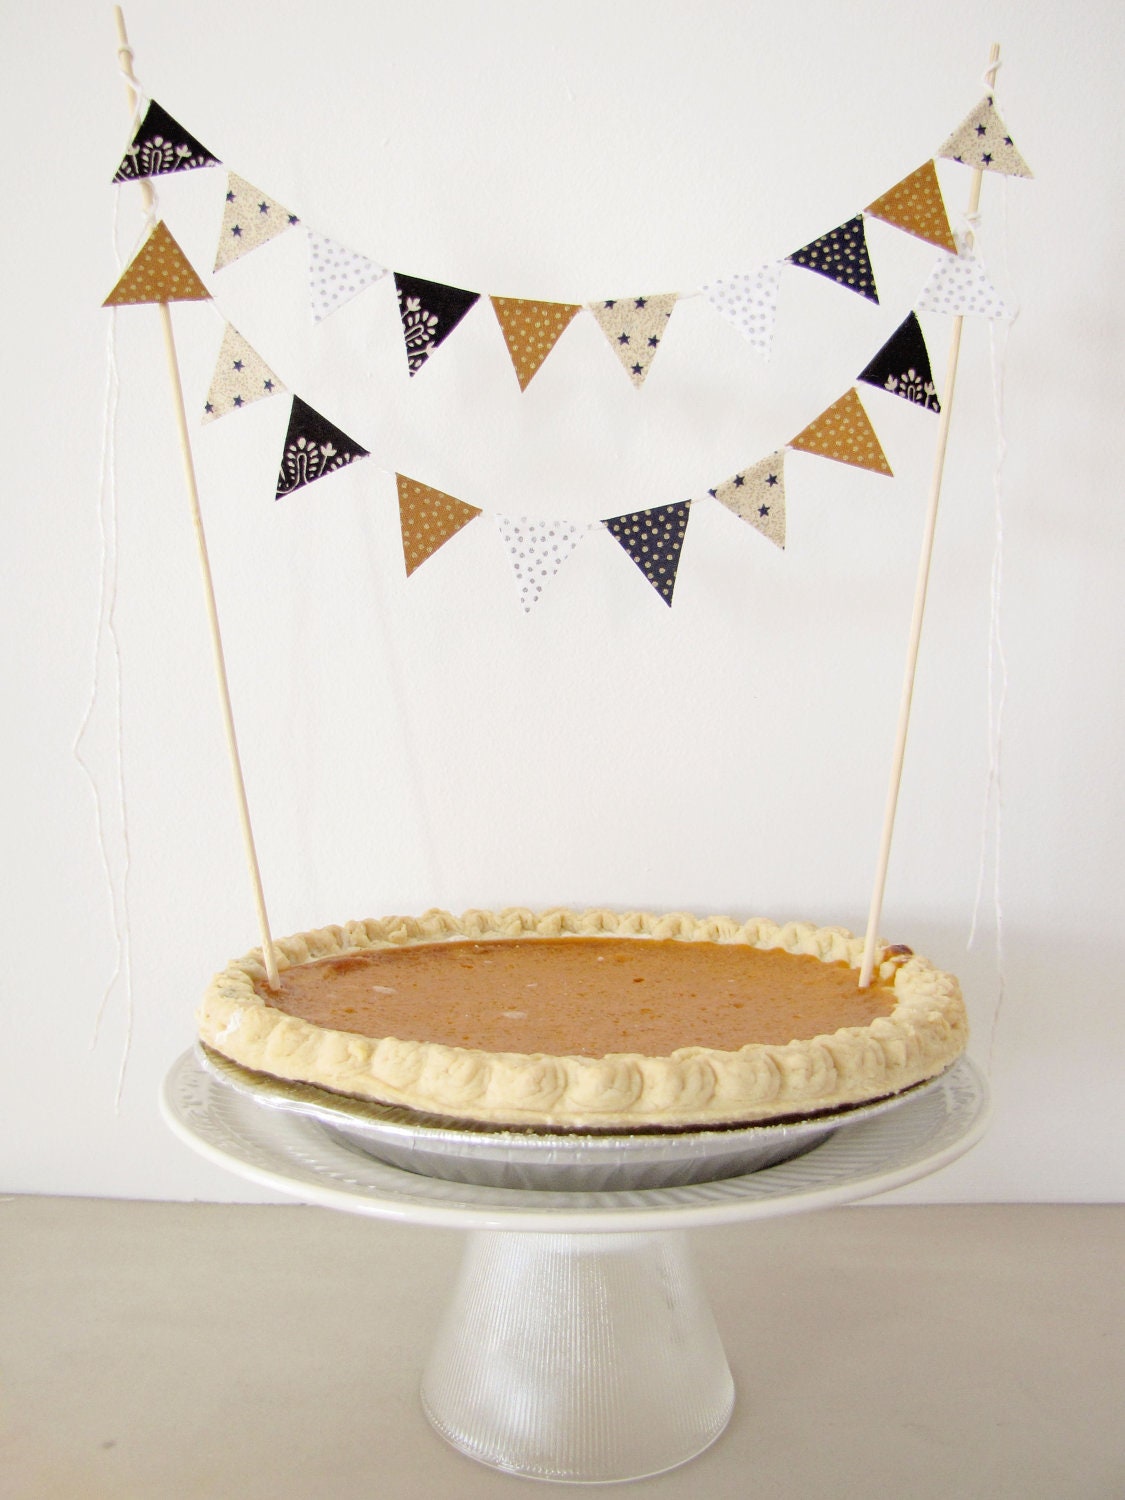 Fabric Cake Bunting Decoration - Cake Topper - Wedding, Birthday Party, Shower - in "New Years Eve" black, gold, white, stars, silver dots